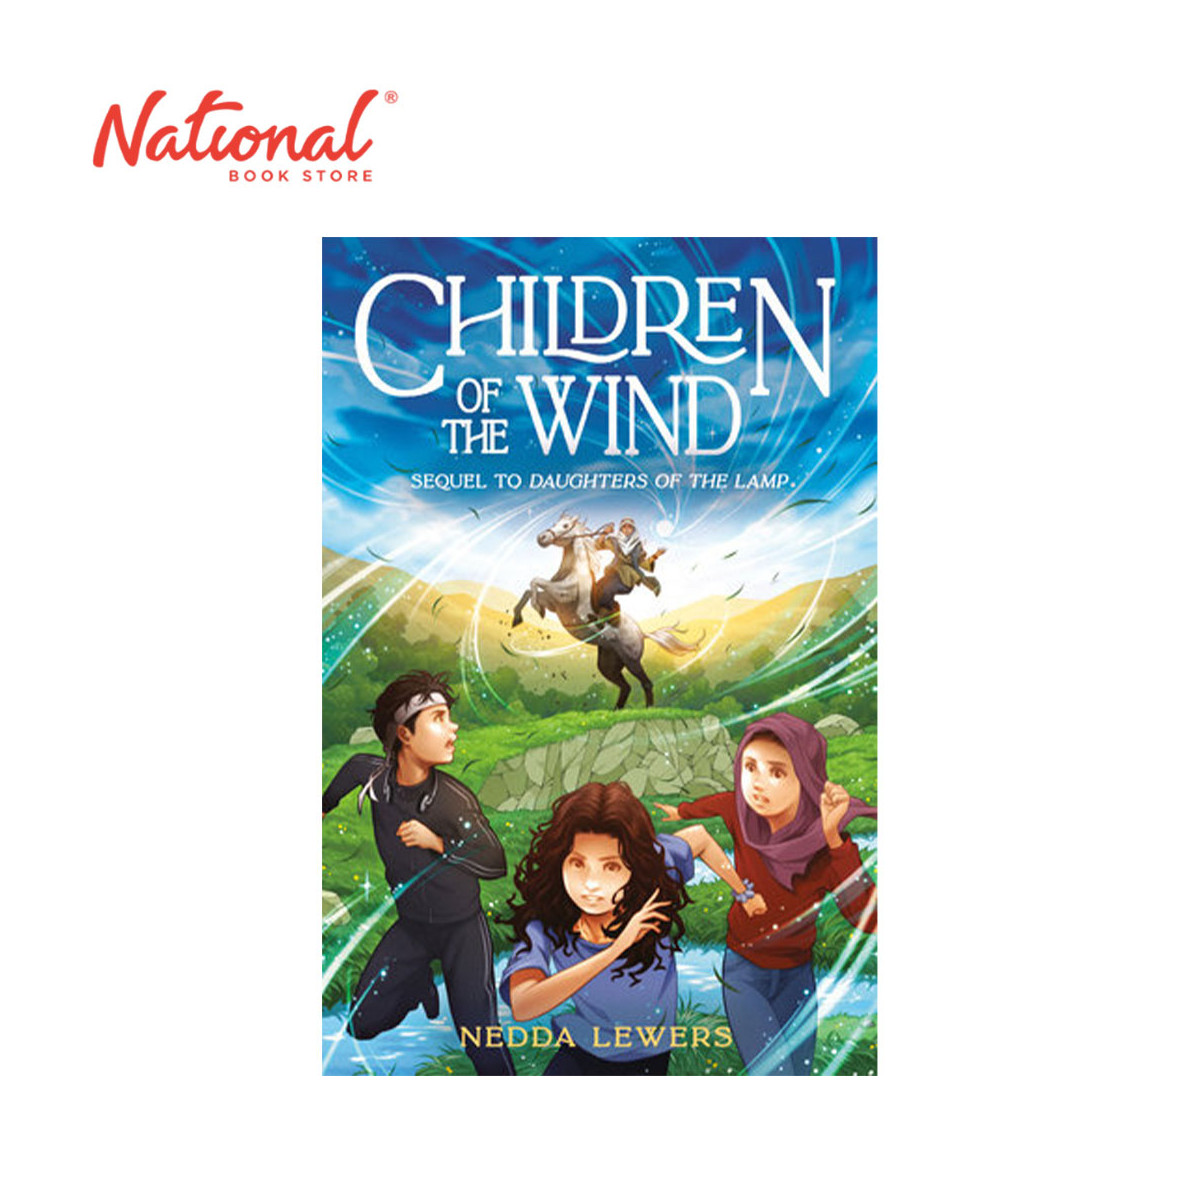 *PRE-ORDER* Children Of The Wind by Nedda Lewers - Hardcover - Children's Fiction